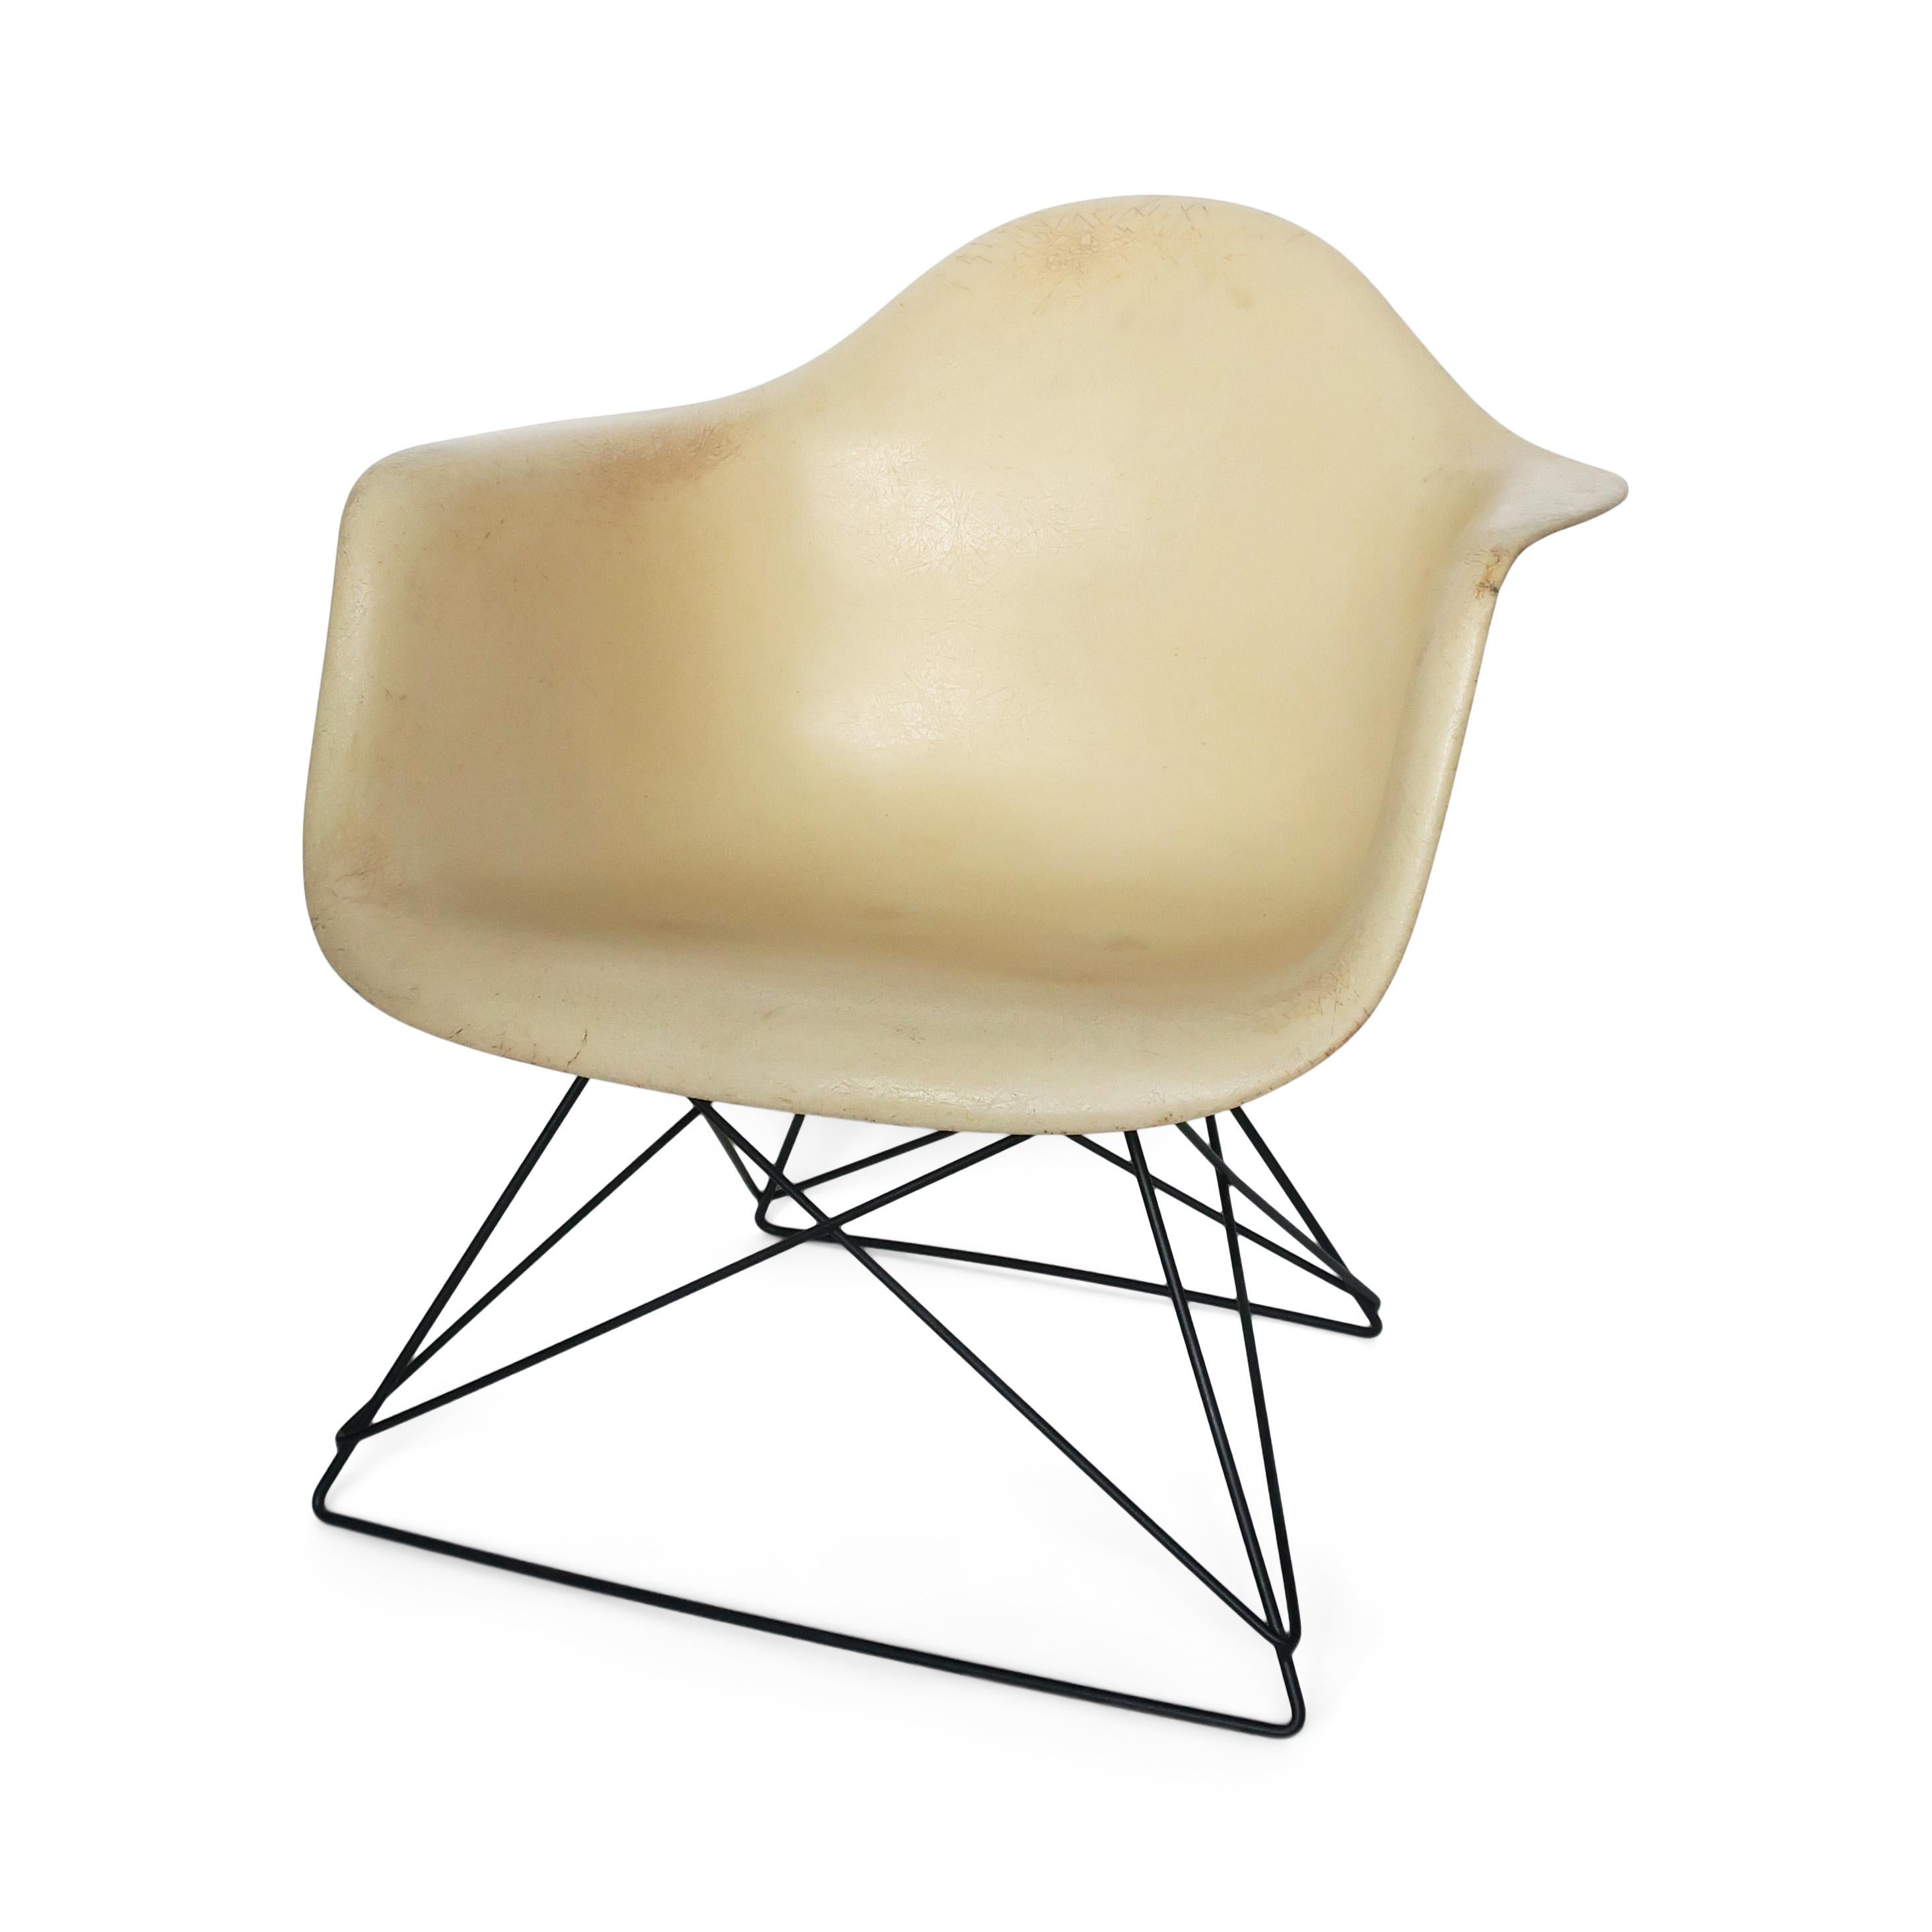 An early example of Charles and Ray Eames' iconic chair design for Herman Miller. Beautiful parchment color with exposed fibers, on a replacement black metal cat's cradle base. 

In vintage condition with wear consistent with age and use,